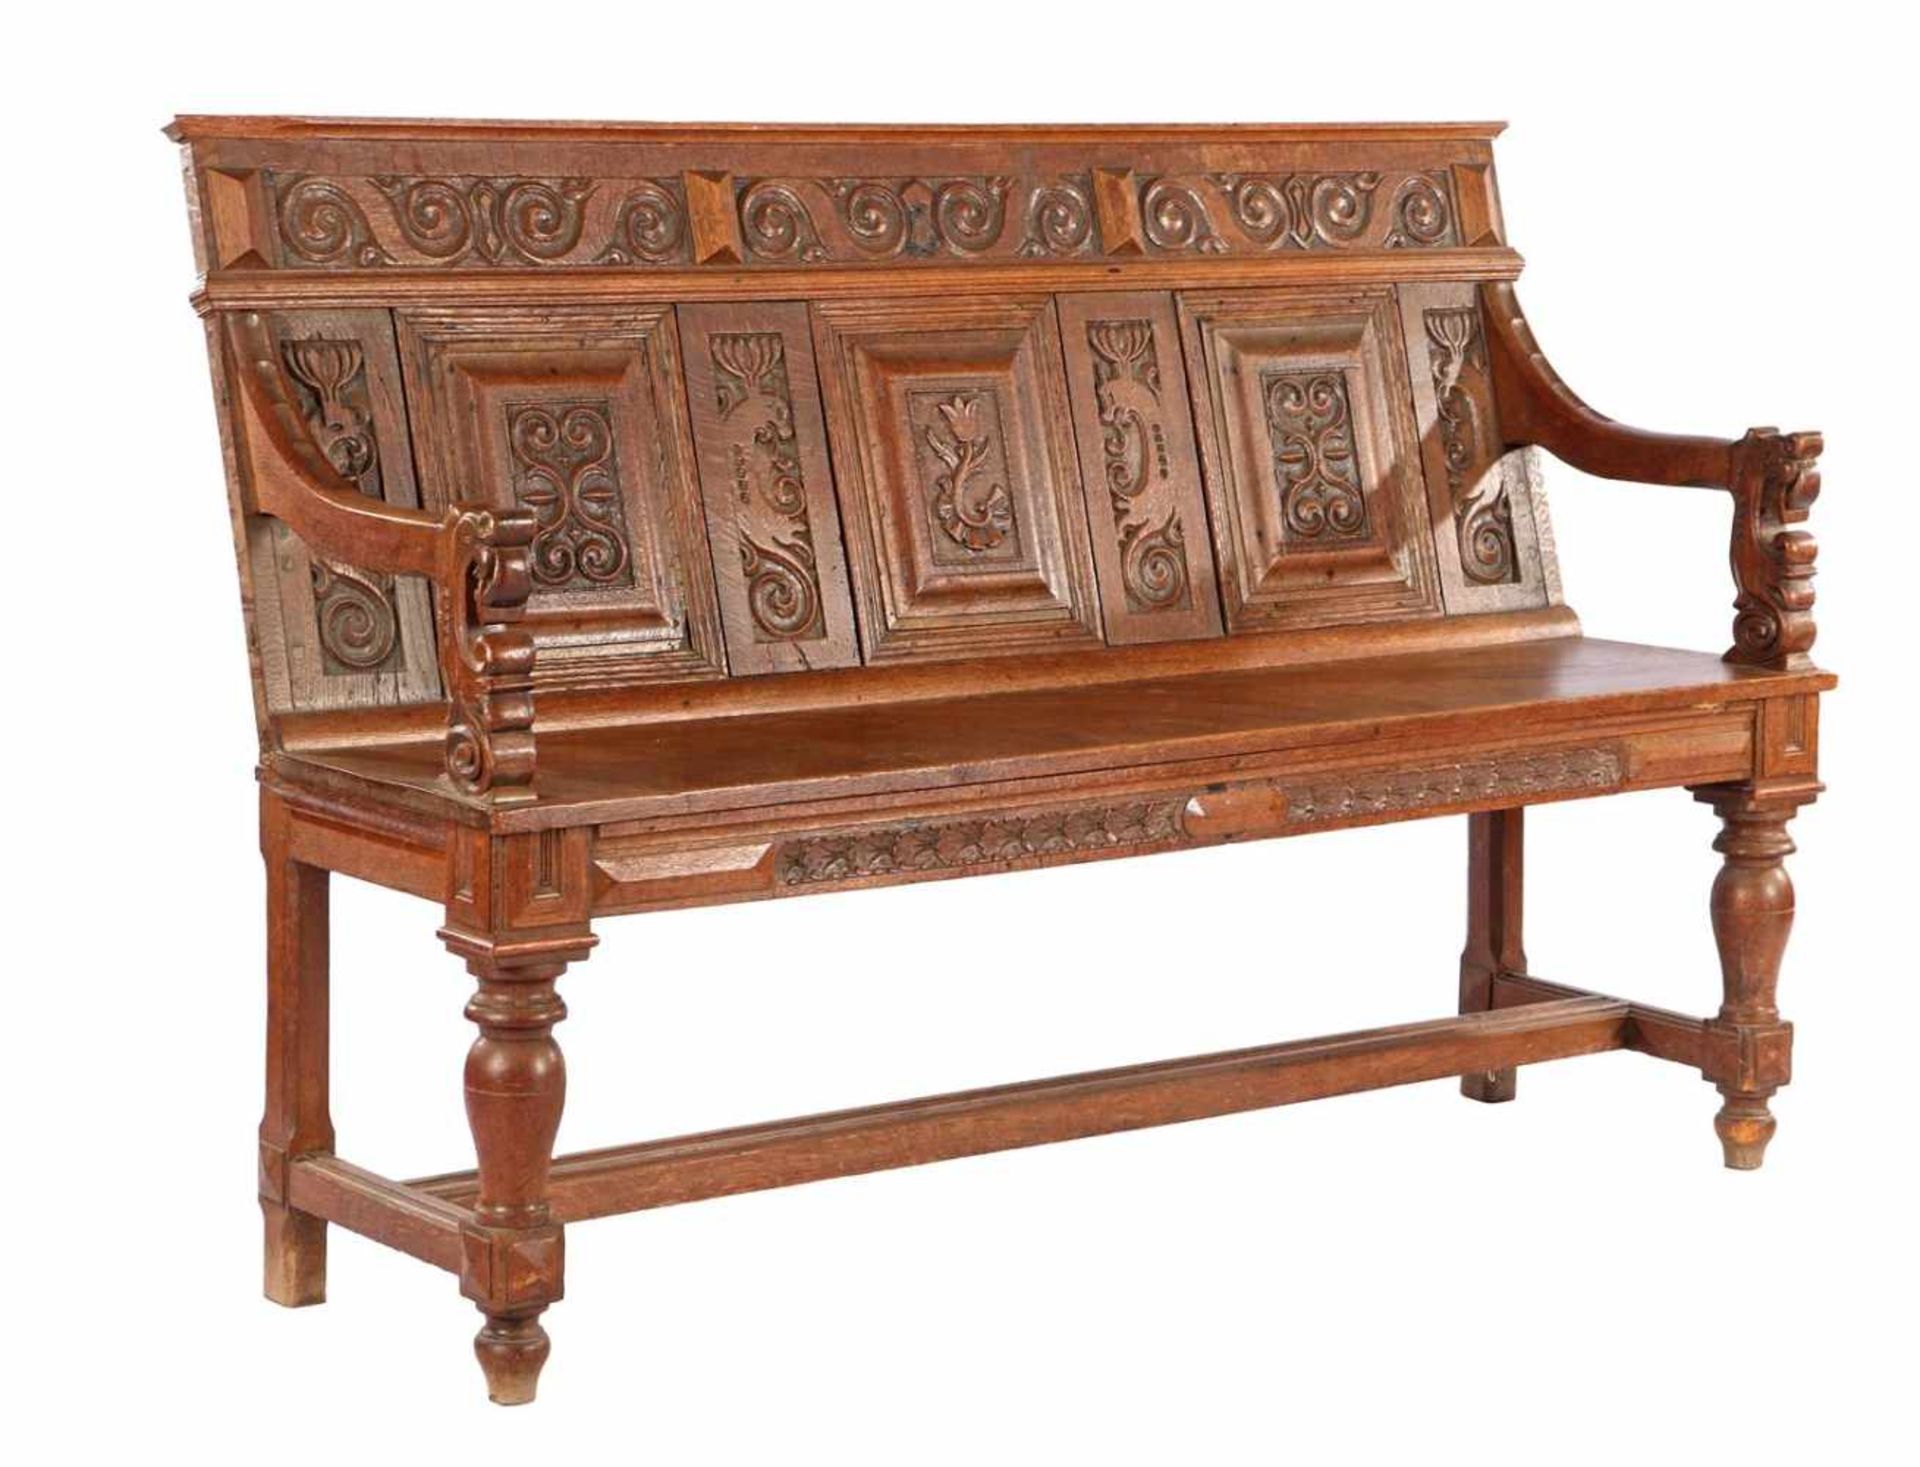 Oak hall bench with rich stitching and control connection, & nbsp; early 19th century & nbsp; 101 cm